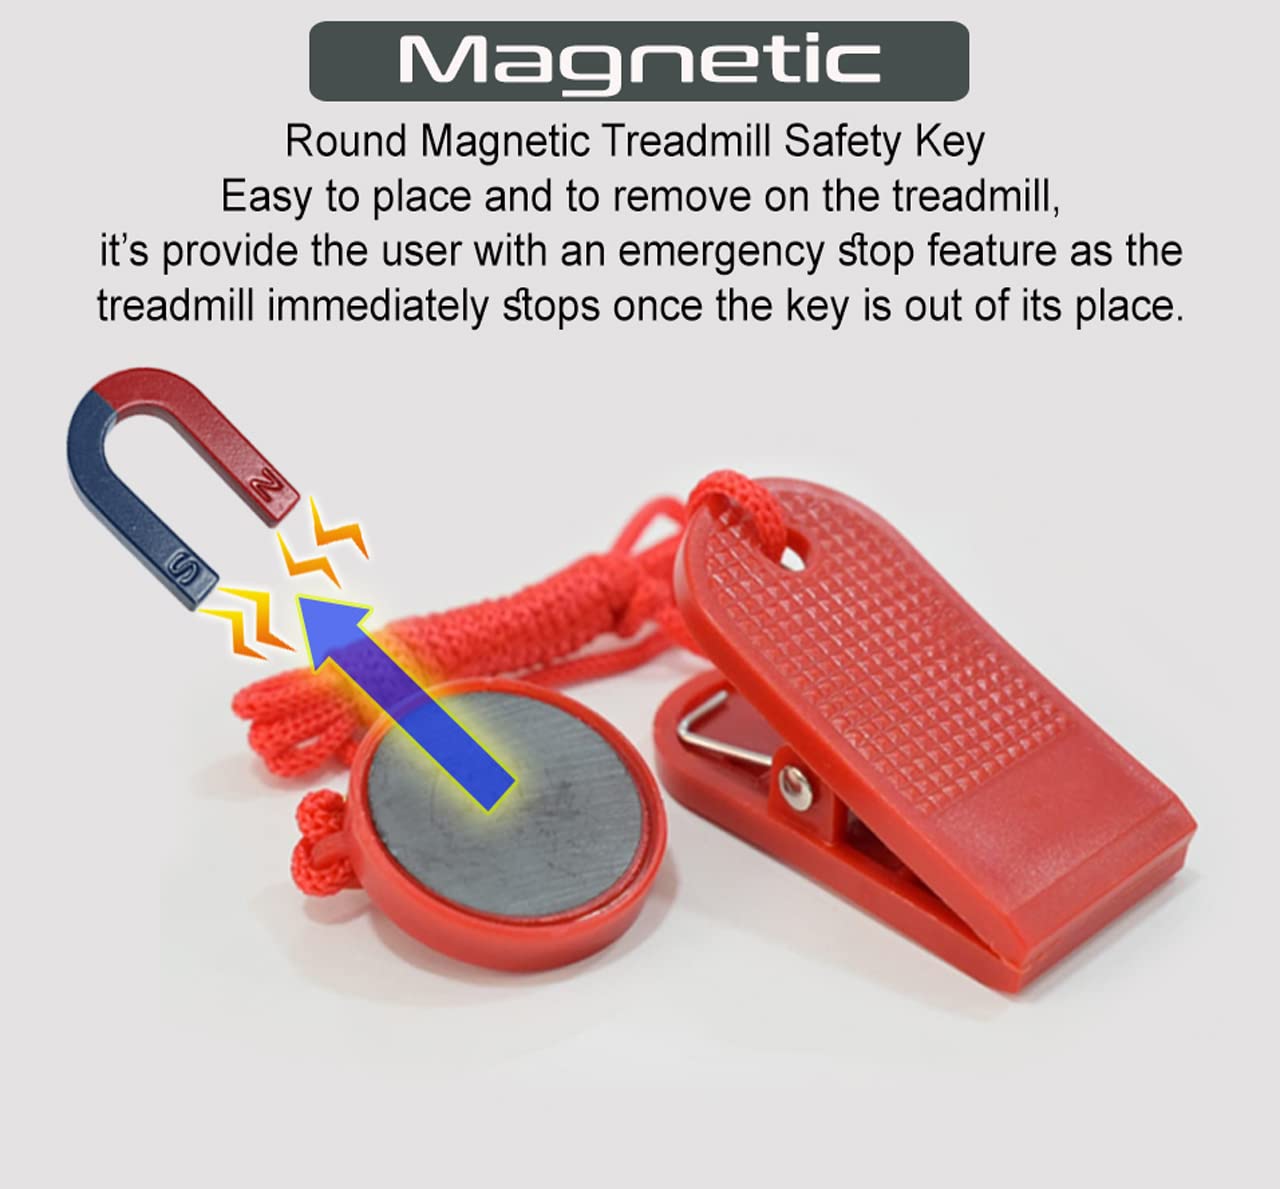 SKY LAND Magnetic Safety Key For Treadmill,Fit Most Treadmill Magnet Security Lock,Suitable For Almost 99% Motorized Treadmill Em Key, Red